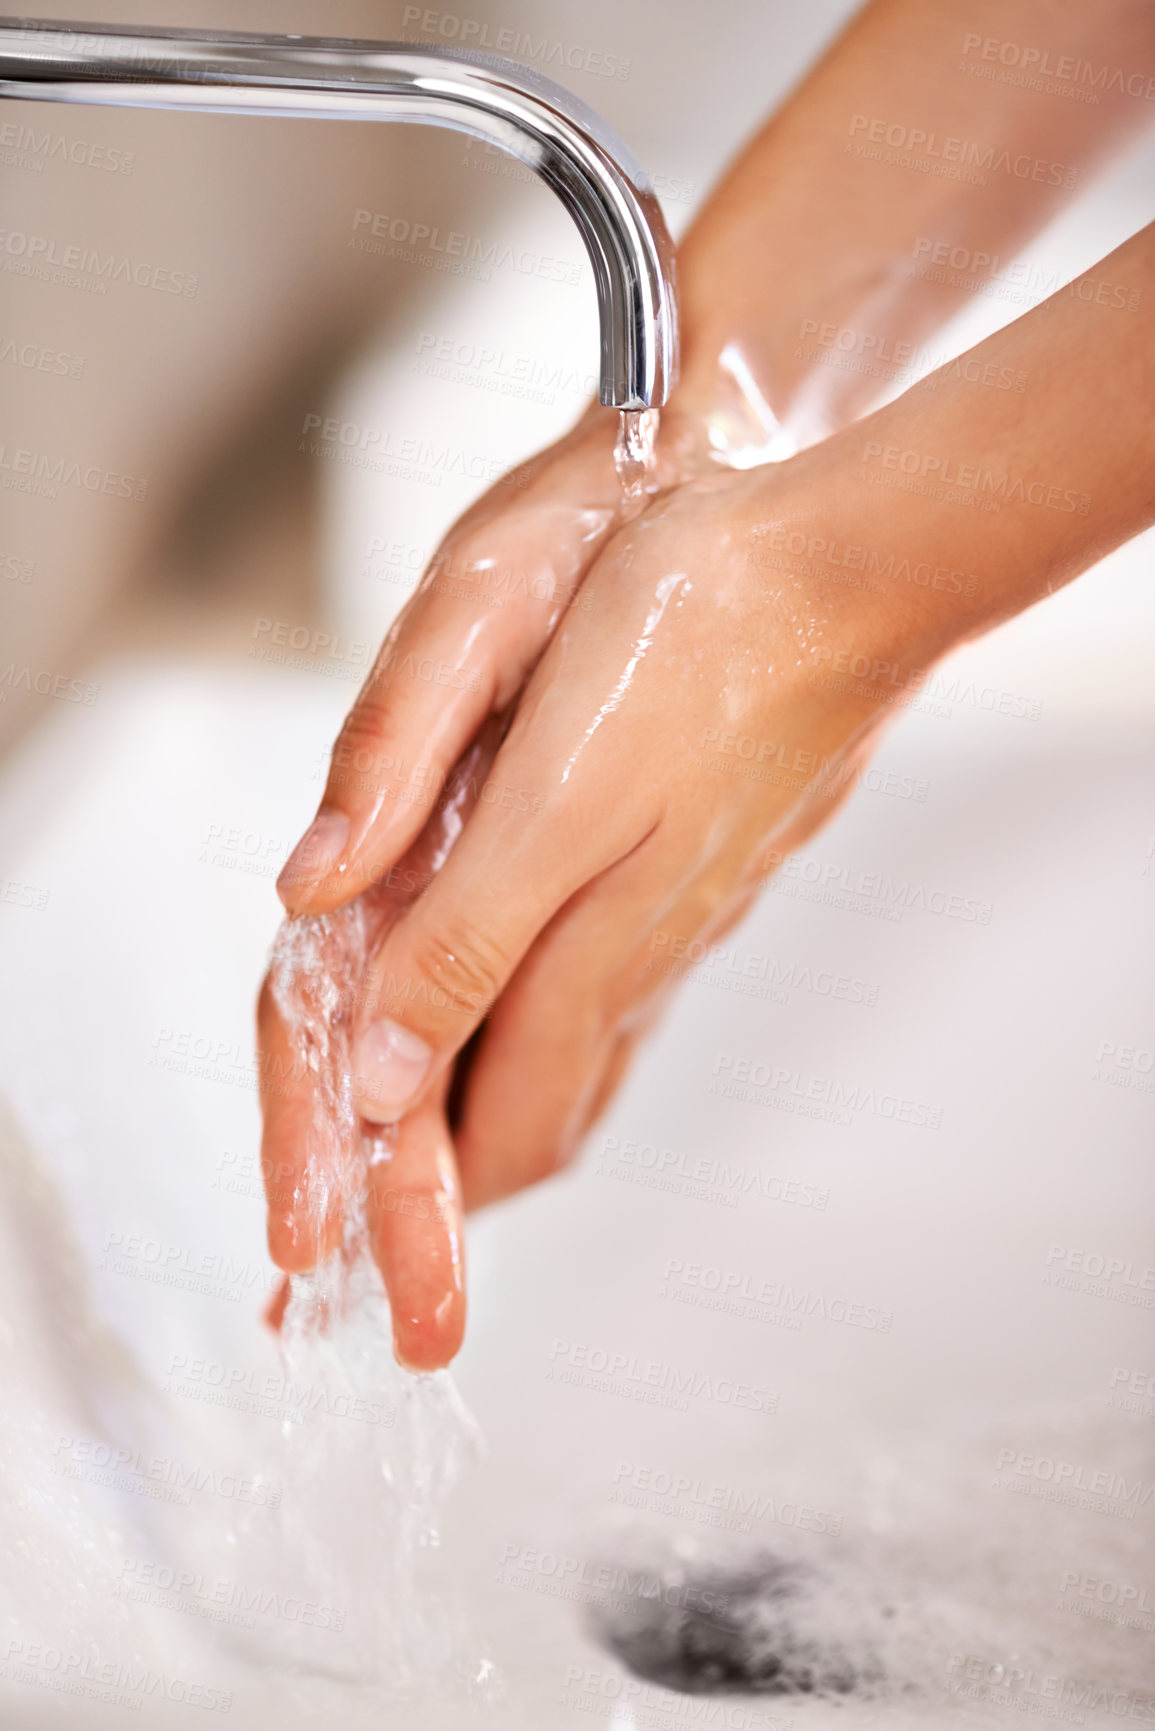 Buy stock photo Cleaning, water and soap on hands of person with skincare, routine and grooming in home closeup. Bathroom, tap and washing skin with foam for protection of hygiene from germs, bacteria and virus